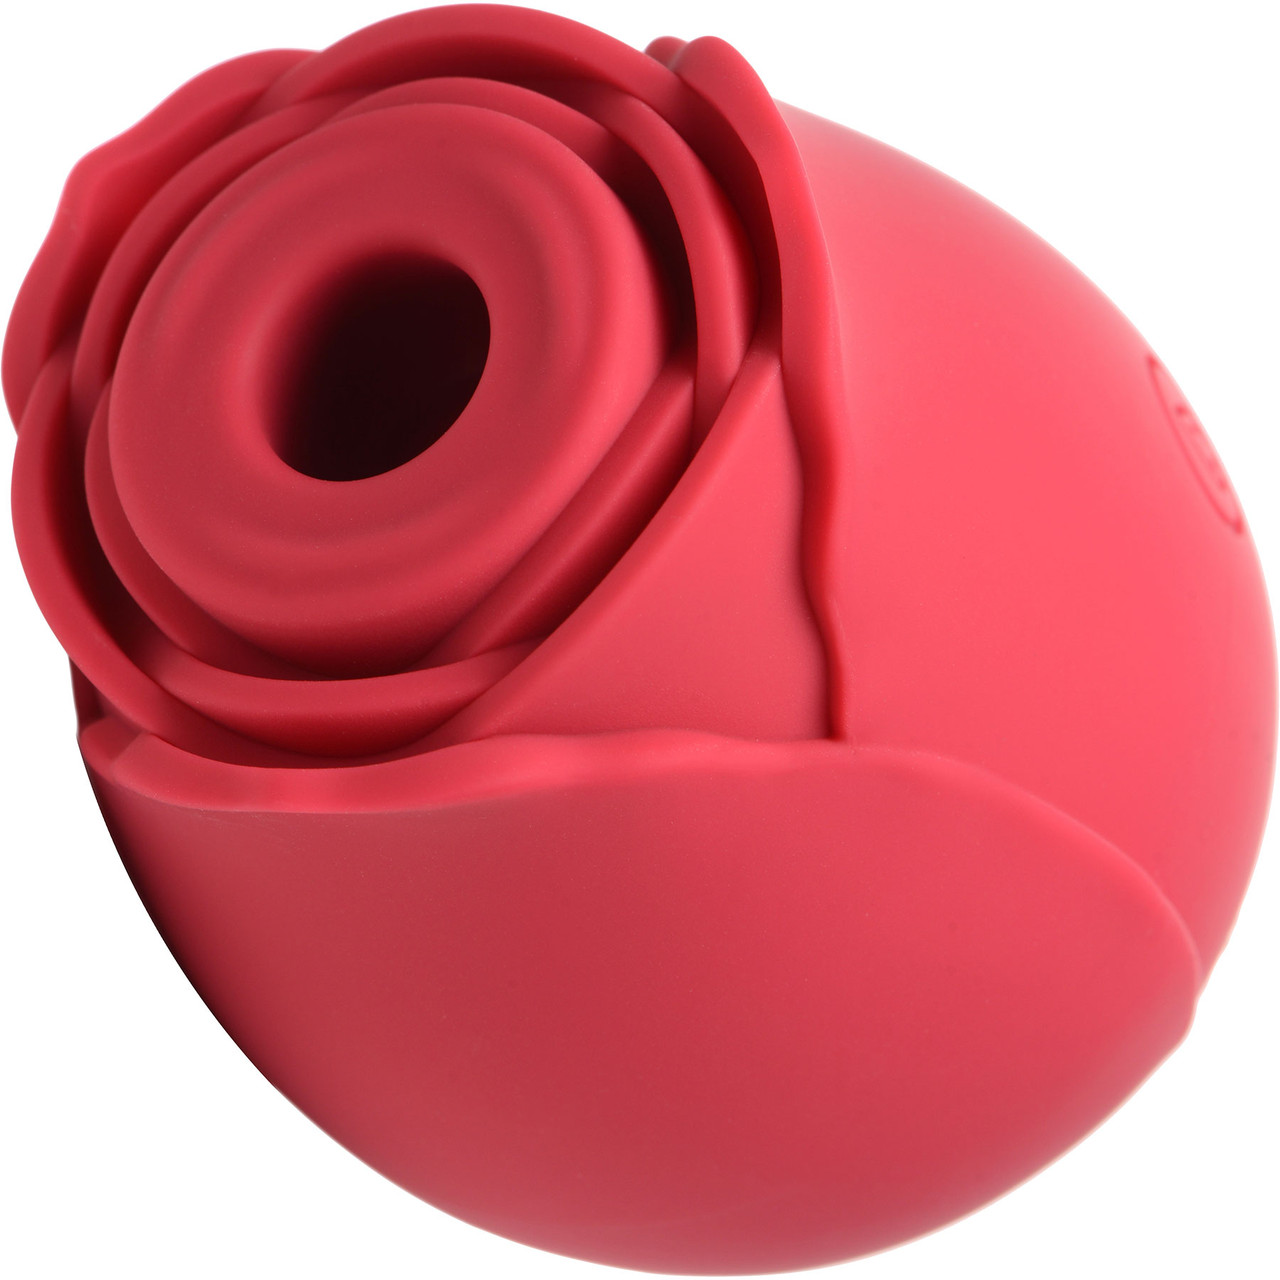 Rose Toy Valentines Gift Box by Bloomgasm – Playthings